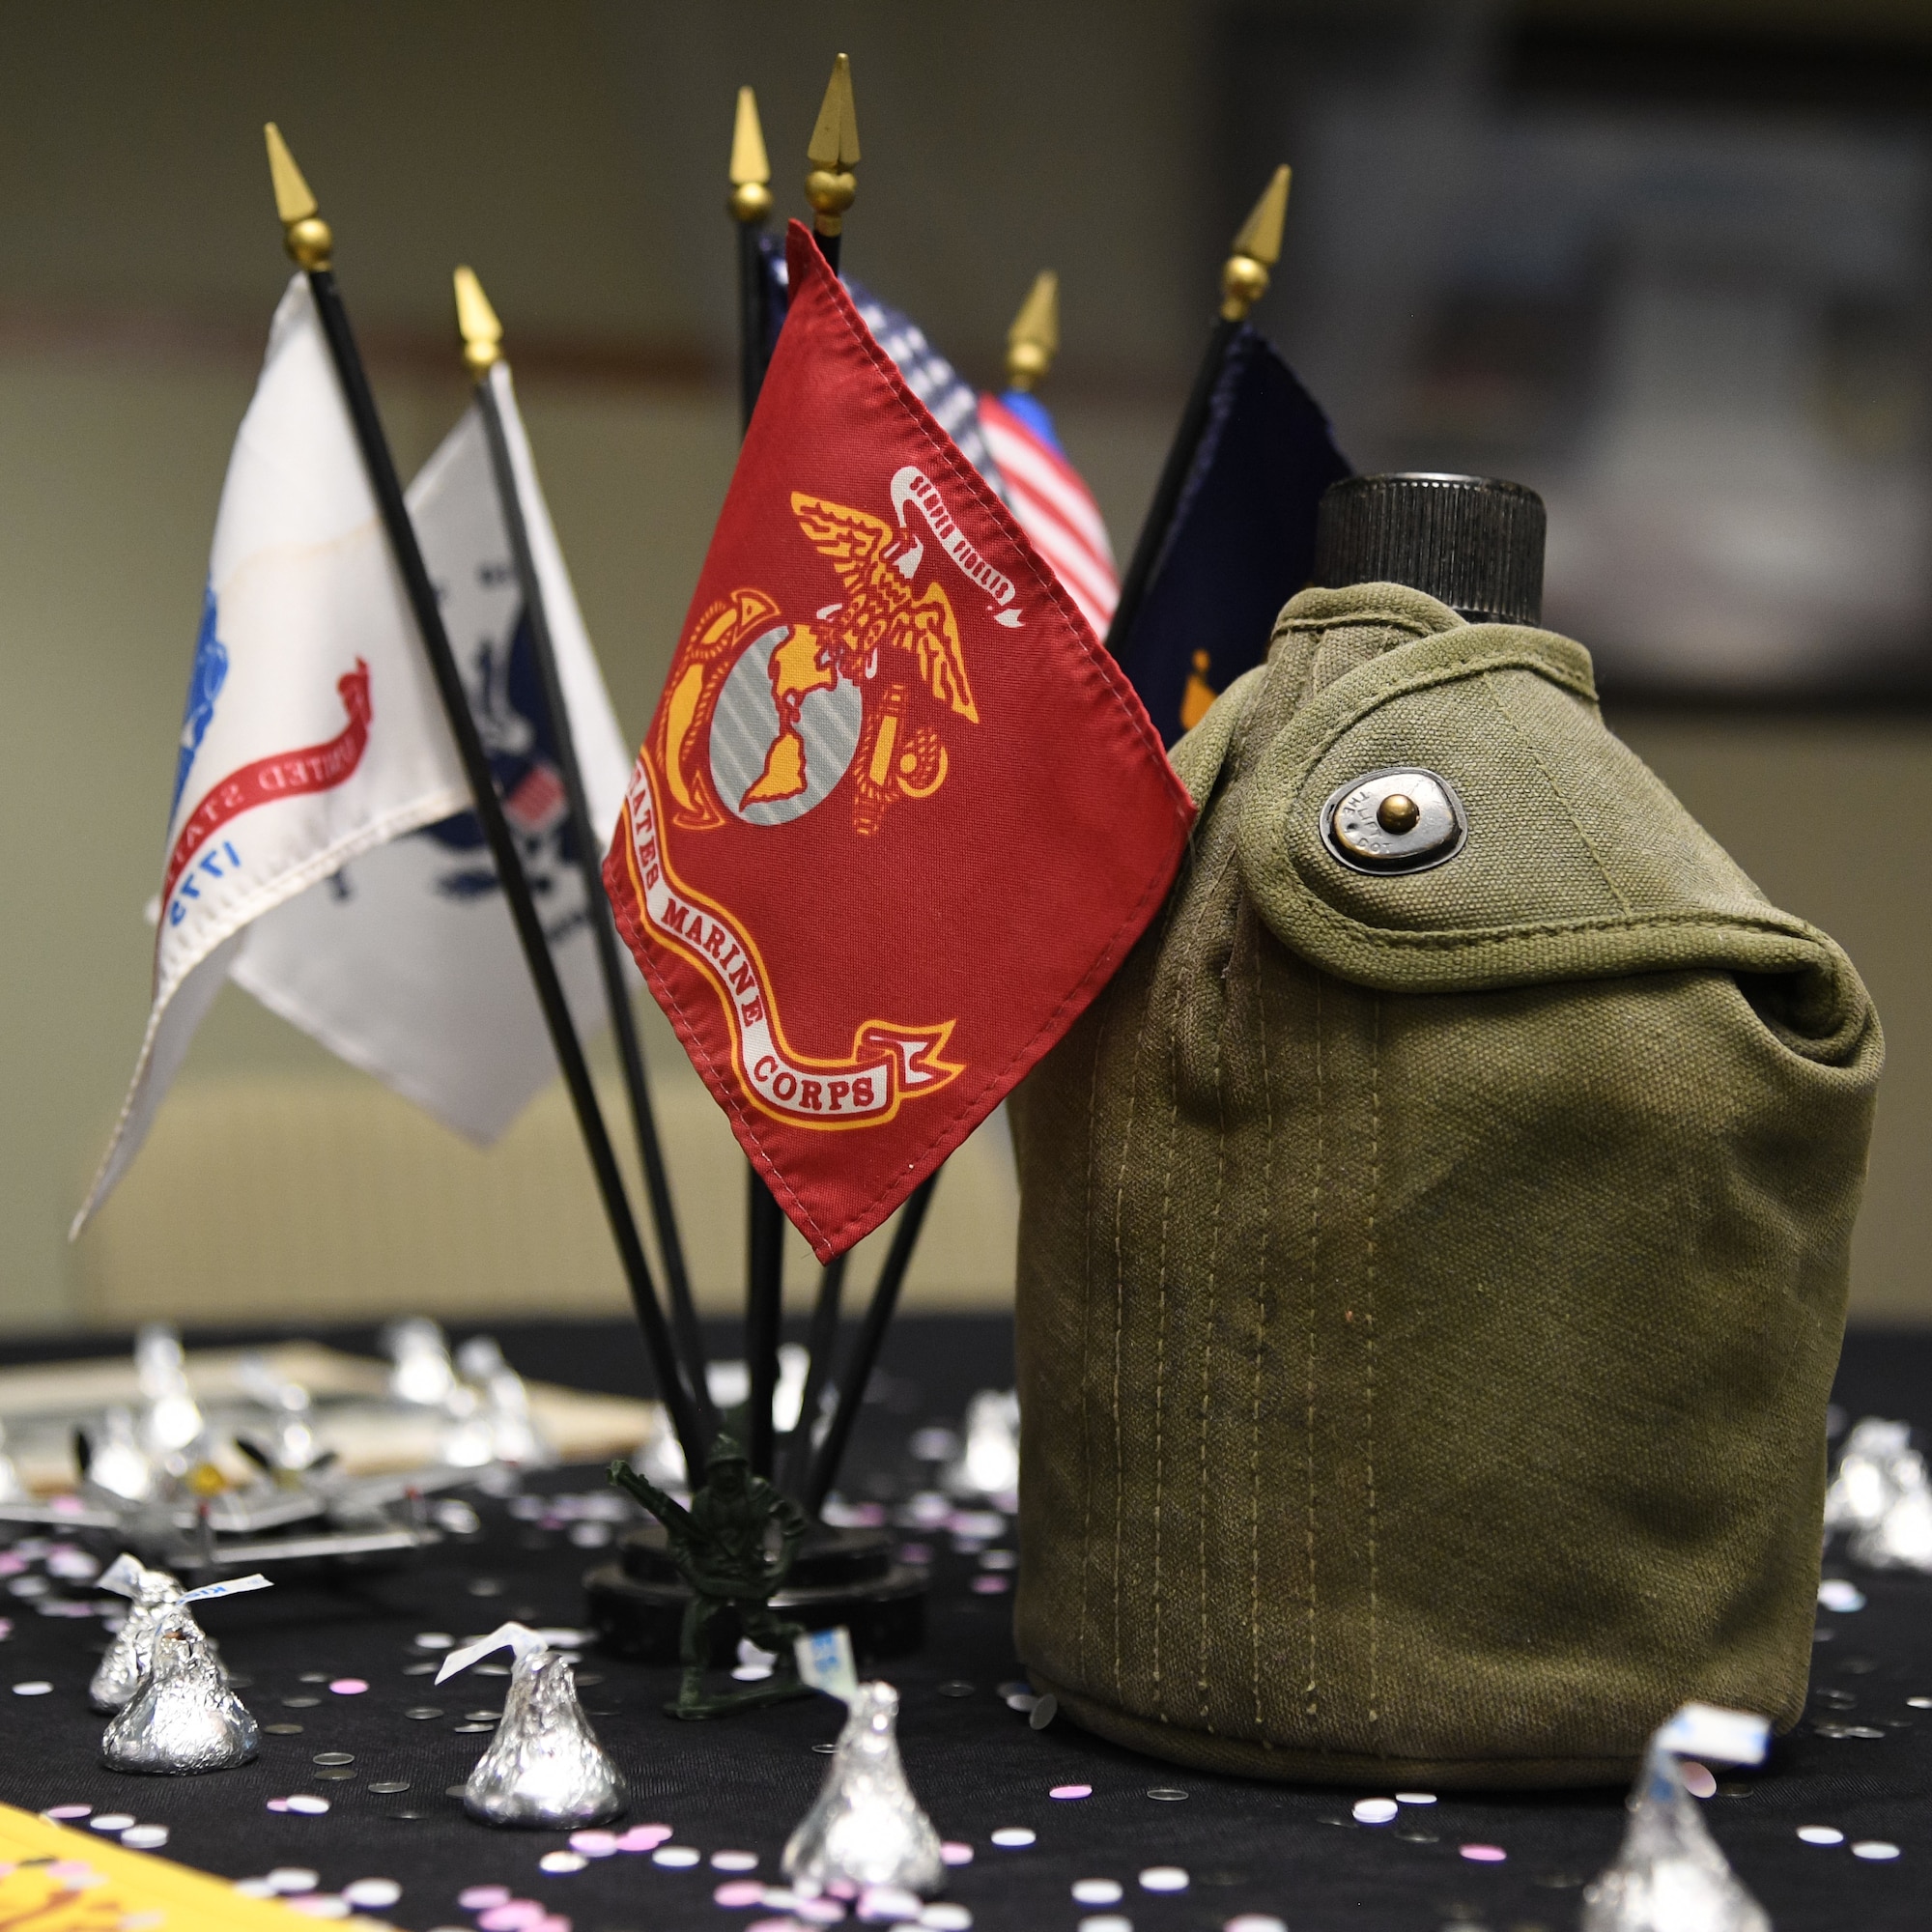 A military-themed centerpiece decorates a table during a Valentine's Day dance held at the George E. Wahlen Veterans Home in Ogden, Utah, Feb. 14, 2018. (U.S. Air Force photo by R. Nial Bradshaw)